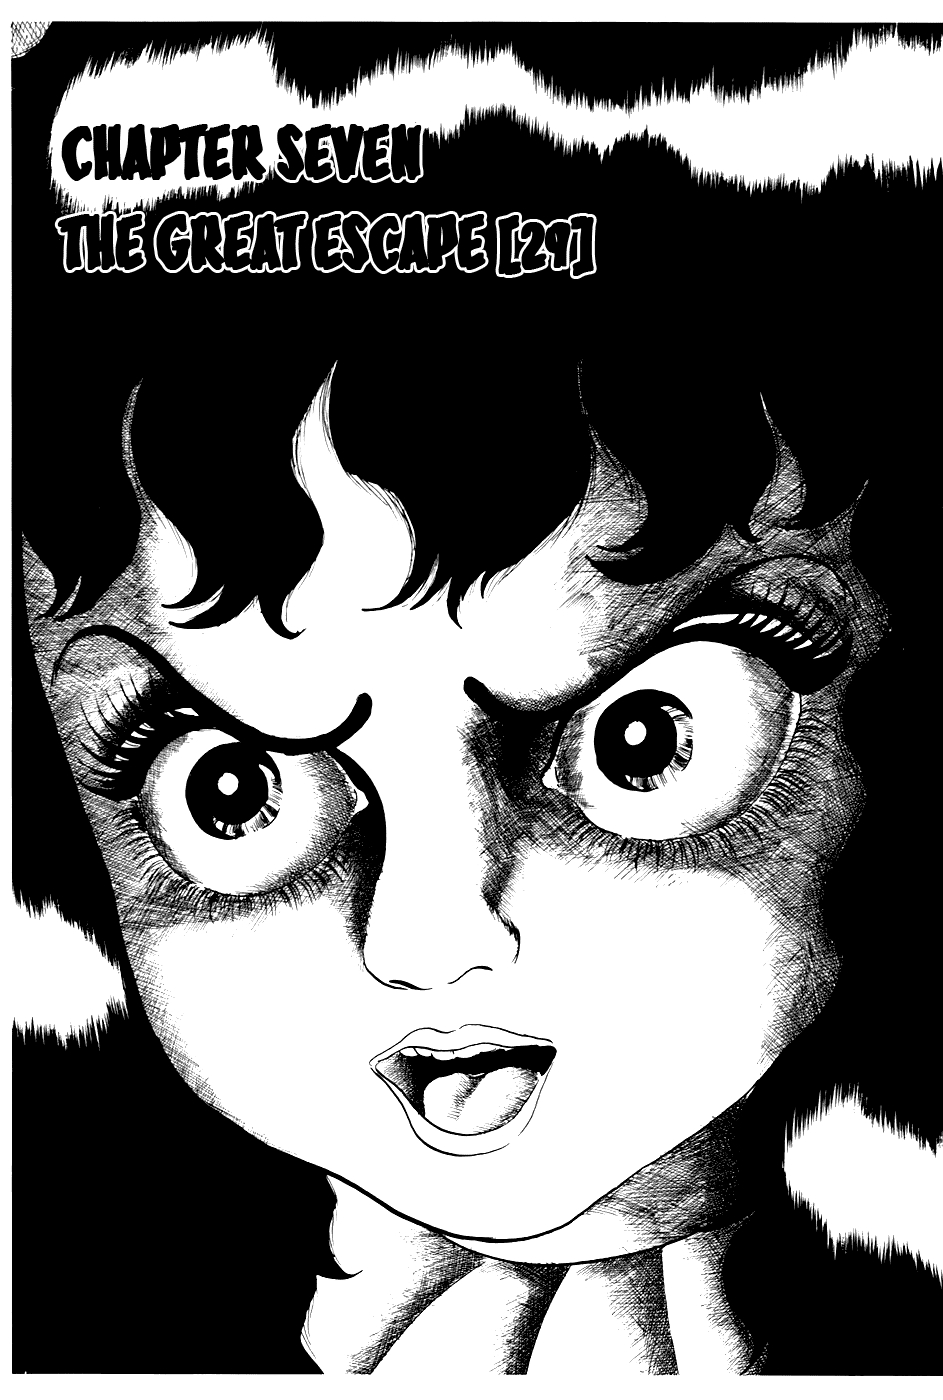 Fourteen Vol. 11 Ch. 208 The Great Escape (29)